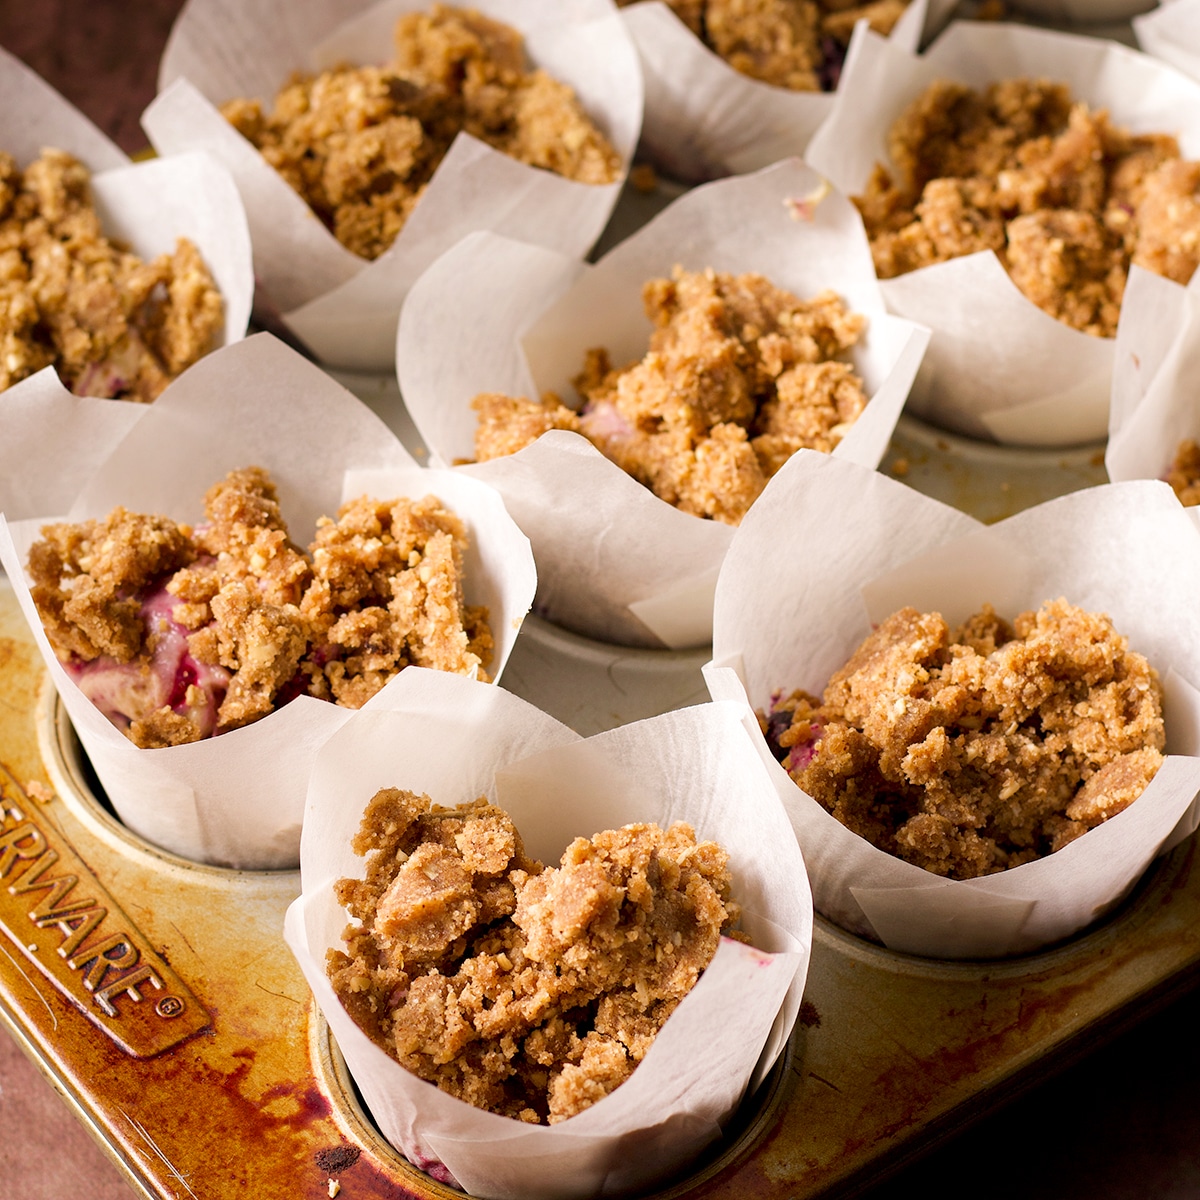 Mixed berry muffin batter distributed evenly between 12 paper-lined muffin cups, topped with streusel, and ready to bake.